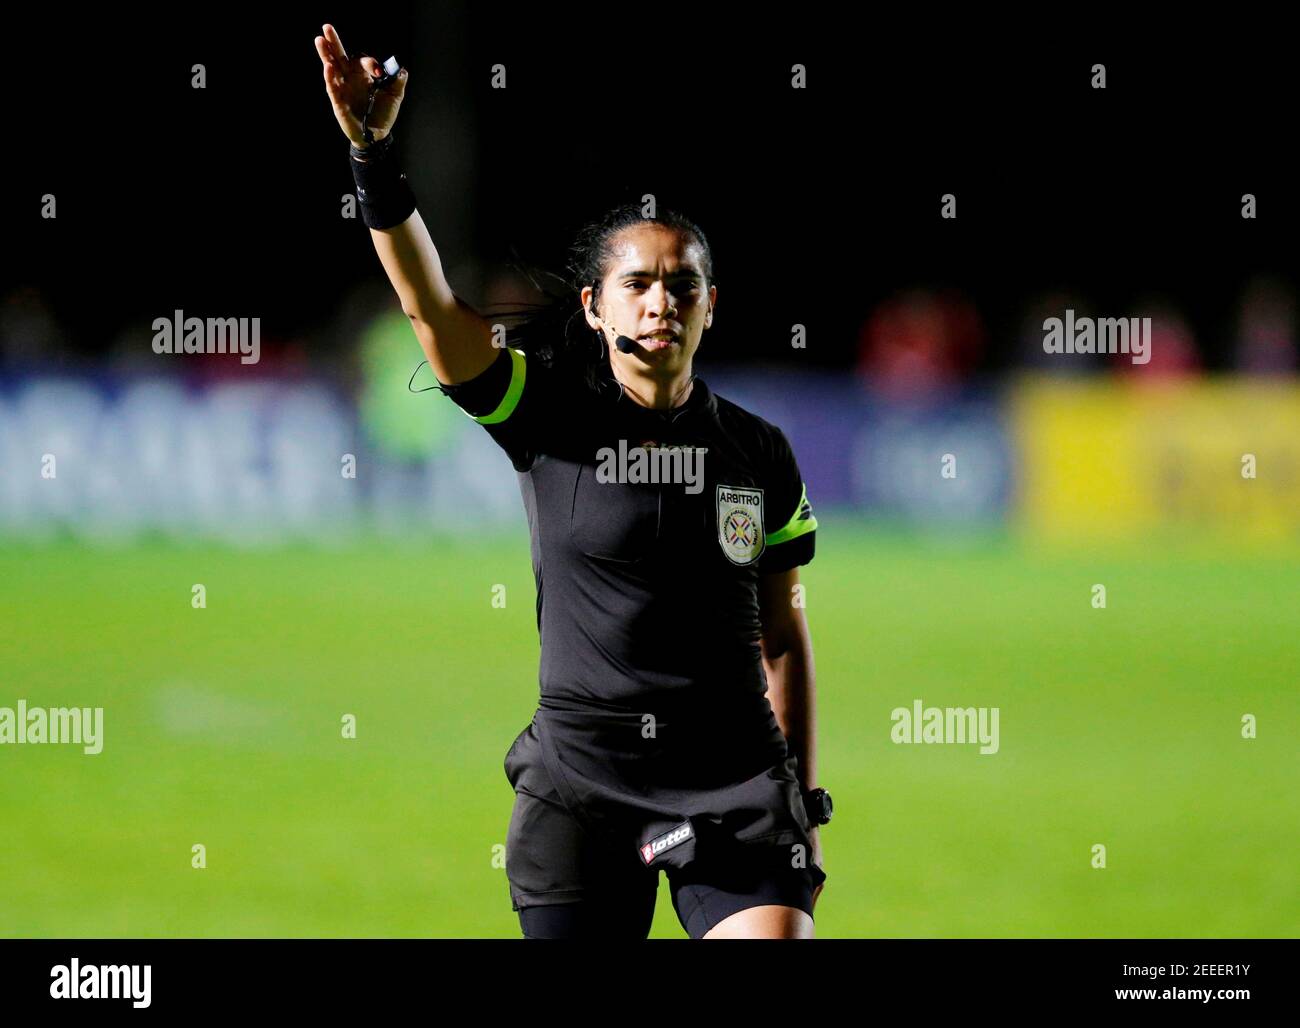 Referee Carmen Gomez in action during her Copa Paraguay match in San Estanislao, Paraguay  July 19, 2019. Picture taken July 18, 2019 REUTERS/Jorge Adorno Stock Photo